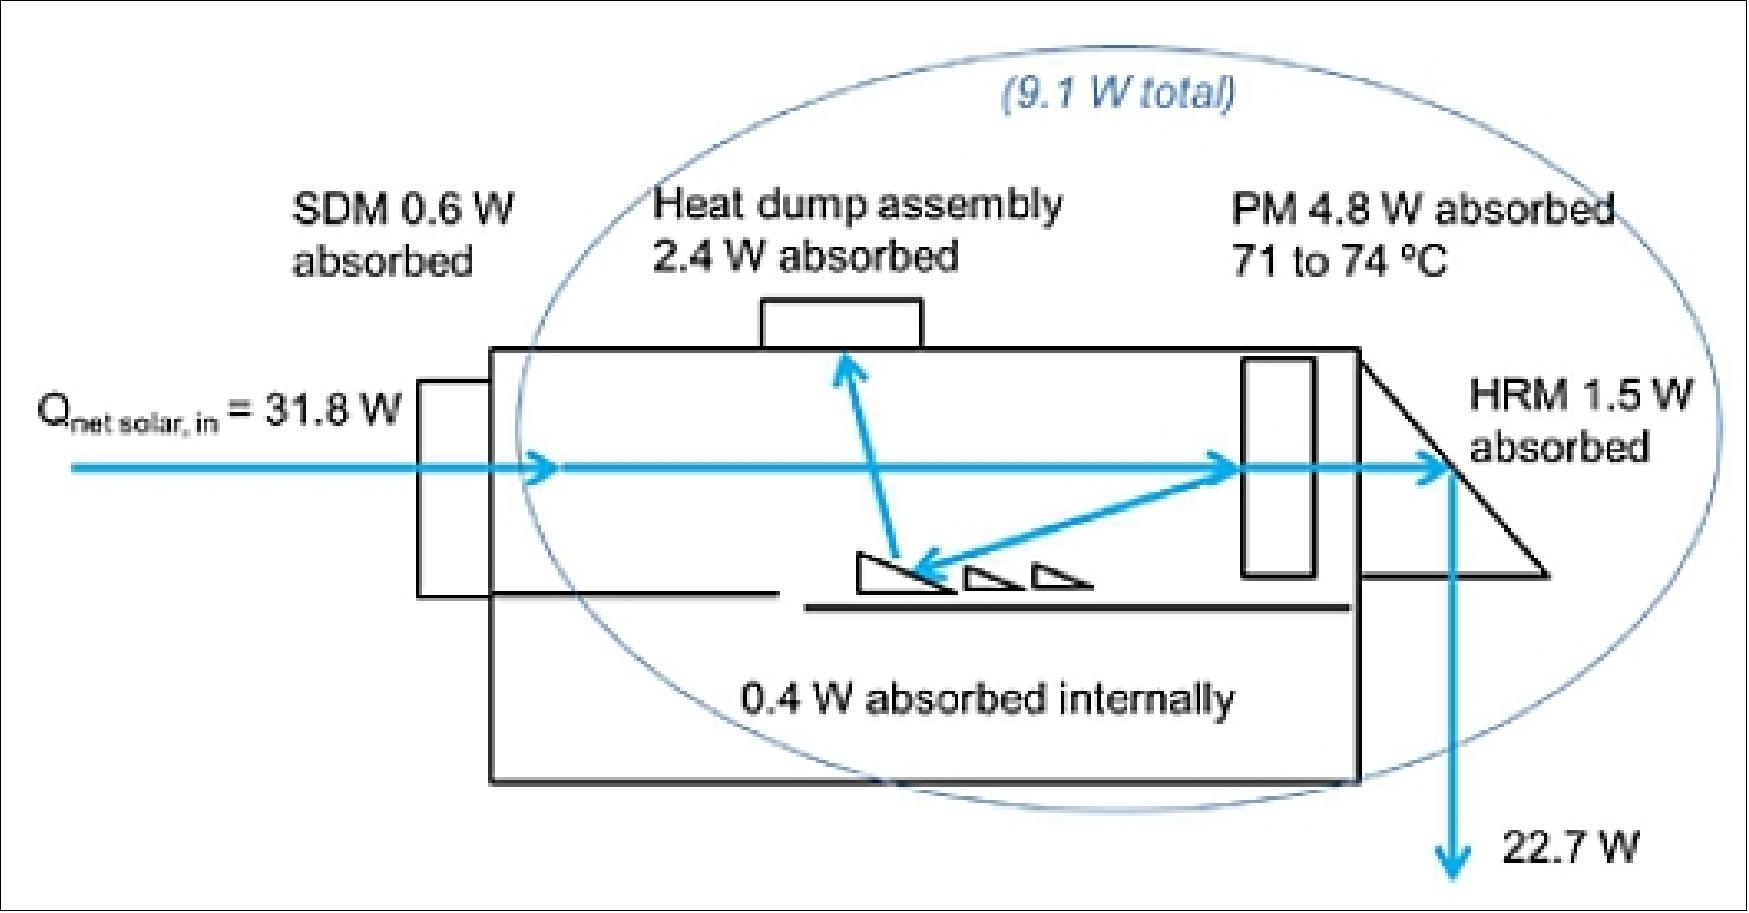 Figure 90: SPICE thermal inputs and outputs (SDM: SPICE Door Mechanism; PM: Primary Mirror; HRM: Heat Rejection Mirror), image credit: ESA